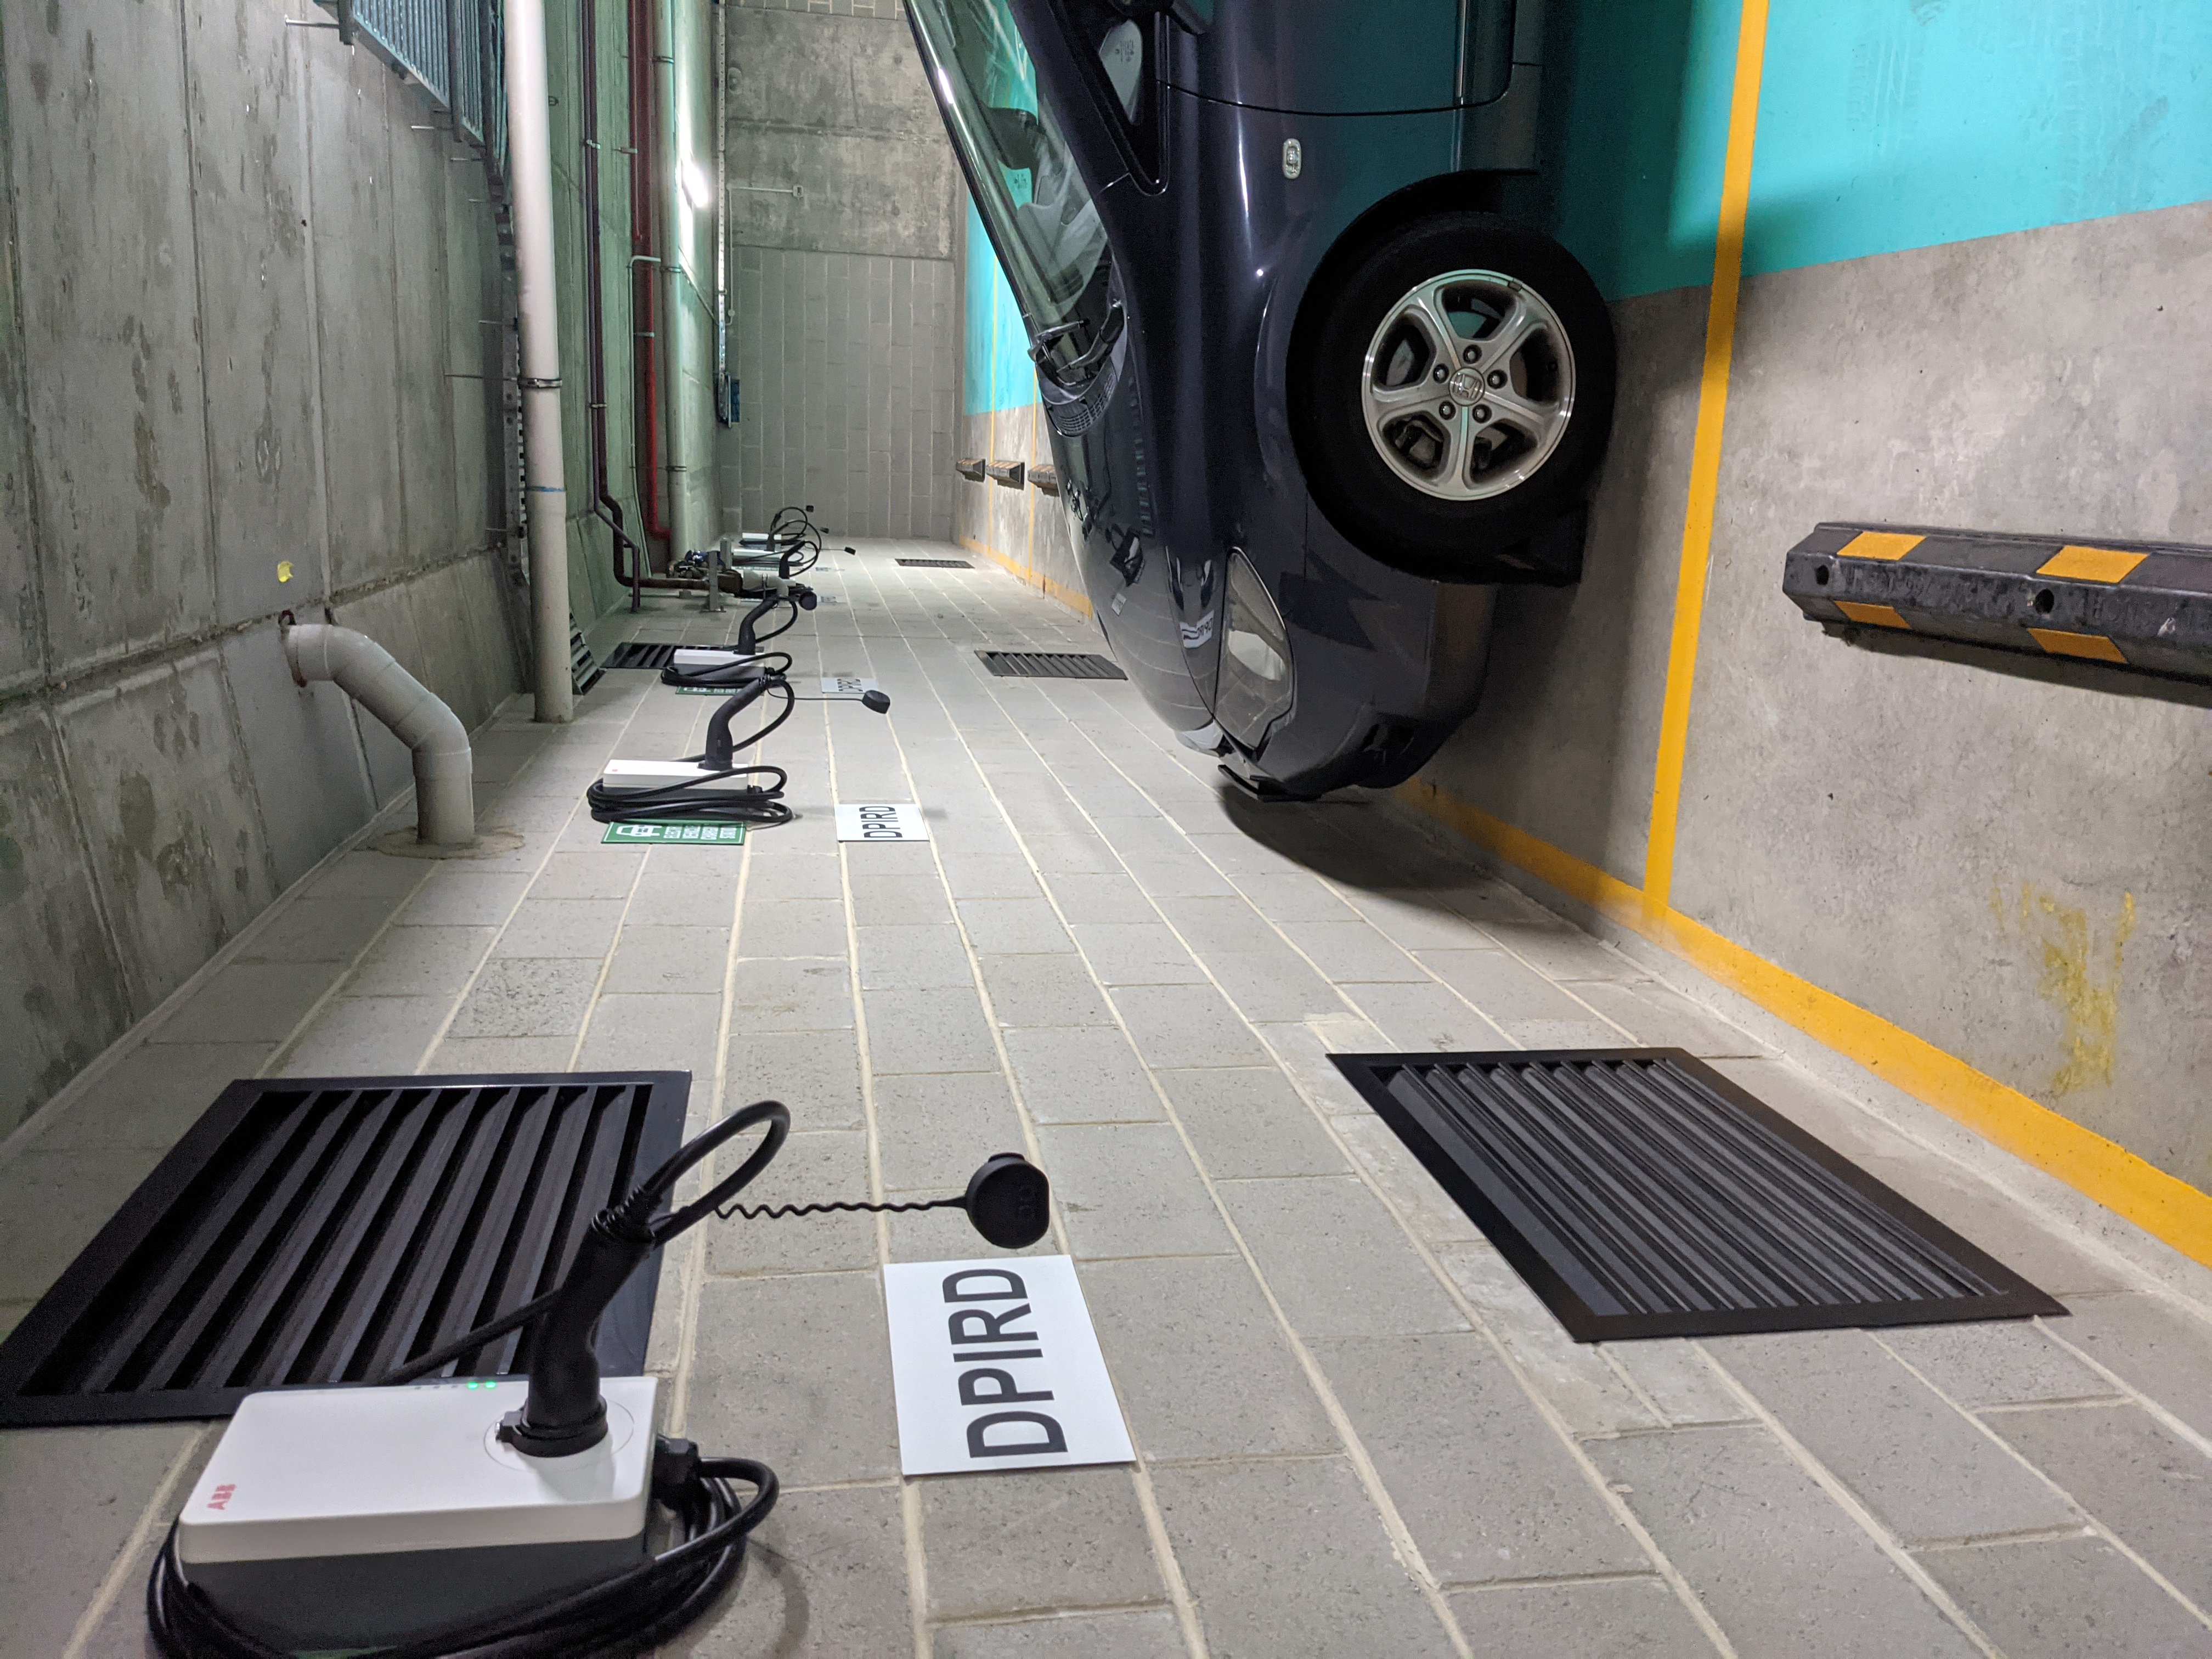 Electric Vehicle Chargers installing in Carpark